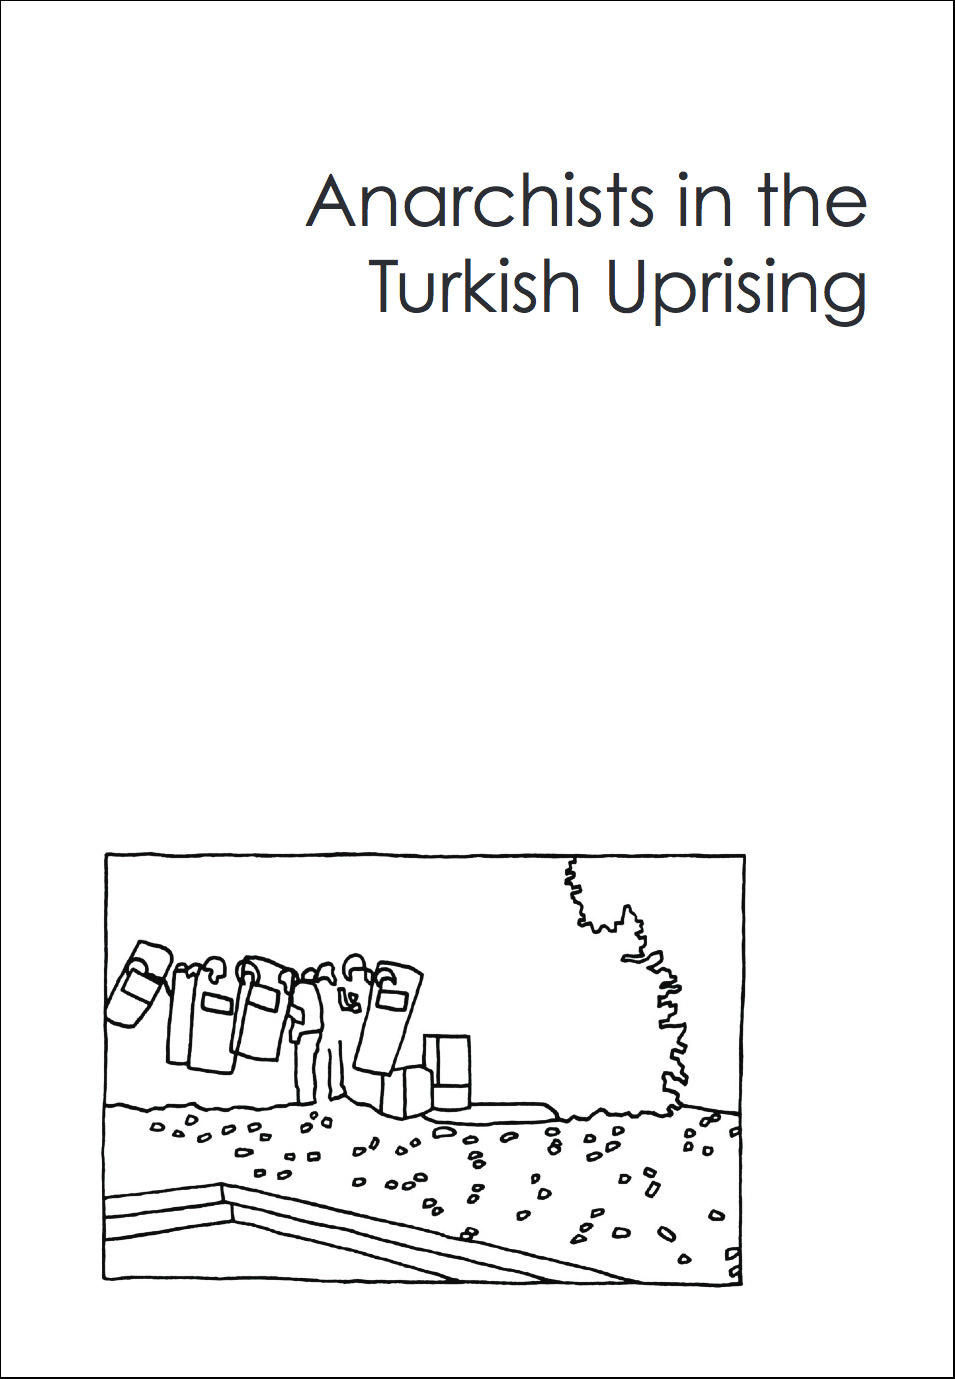 Photo of ‘Anarchists in the Turkish Uprising’ front cover